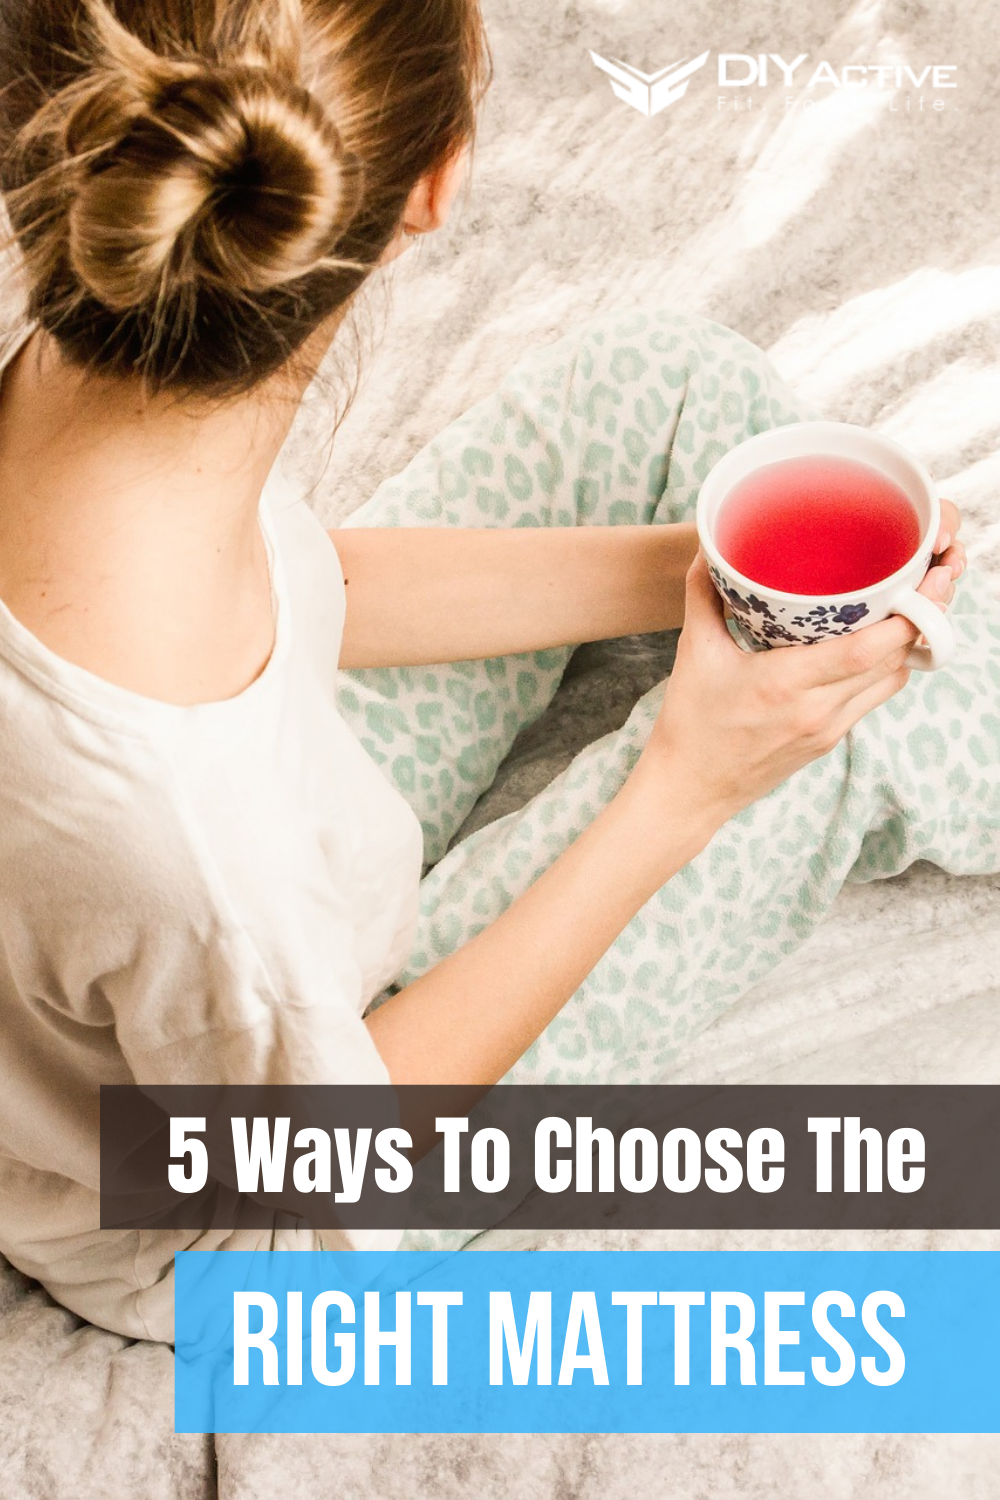 5 Ways To Choose The Right Mattress For Your Home